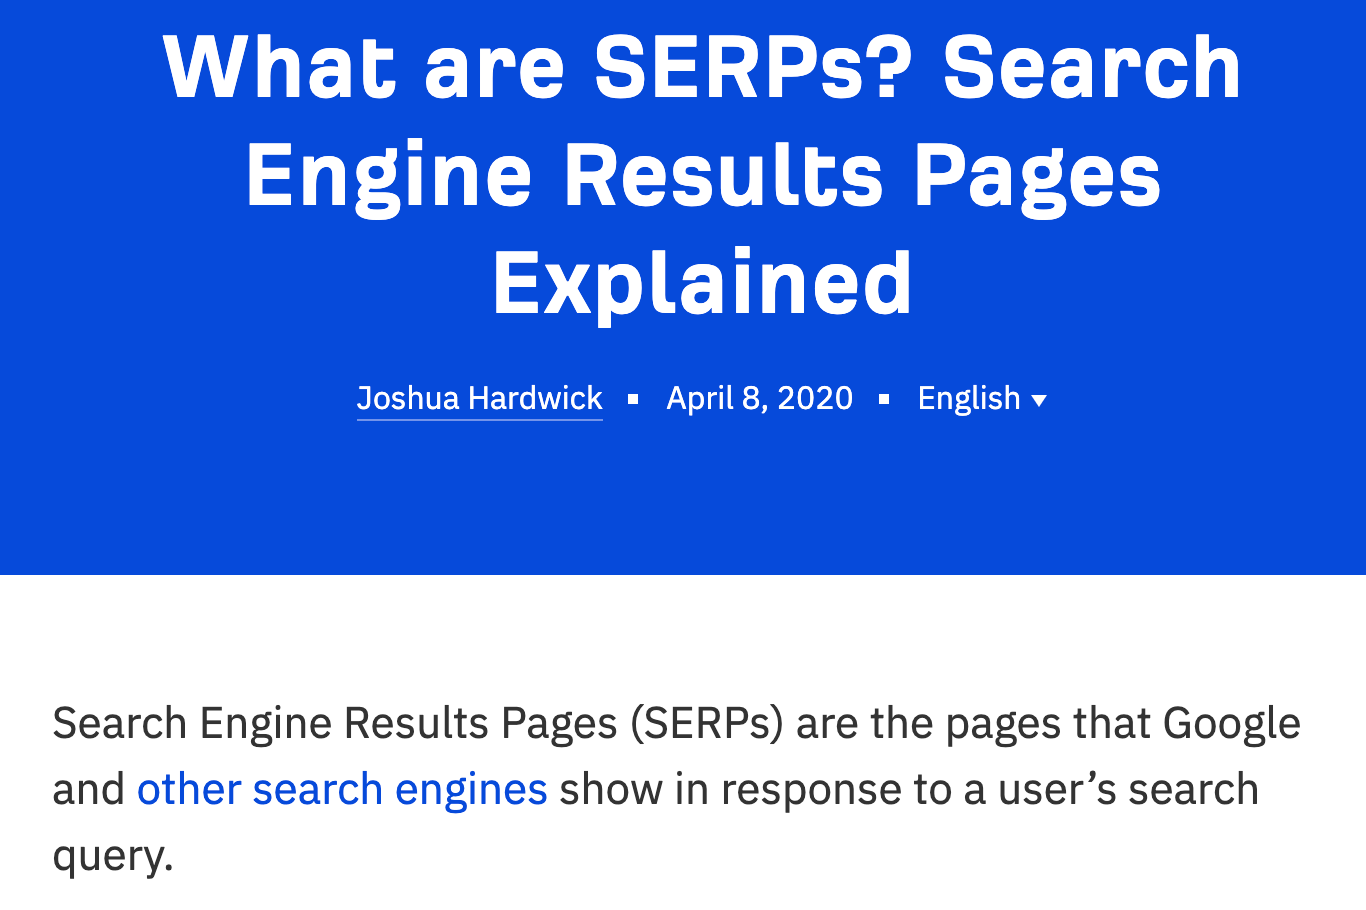 Ahrefs blog post on "what are SERPs"
